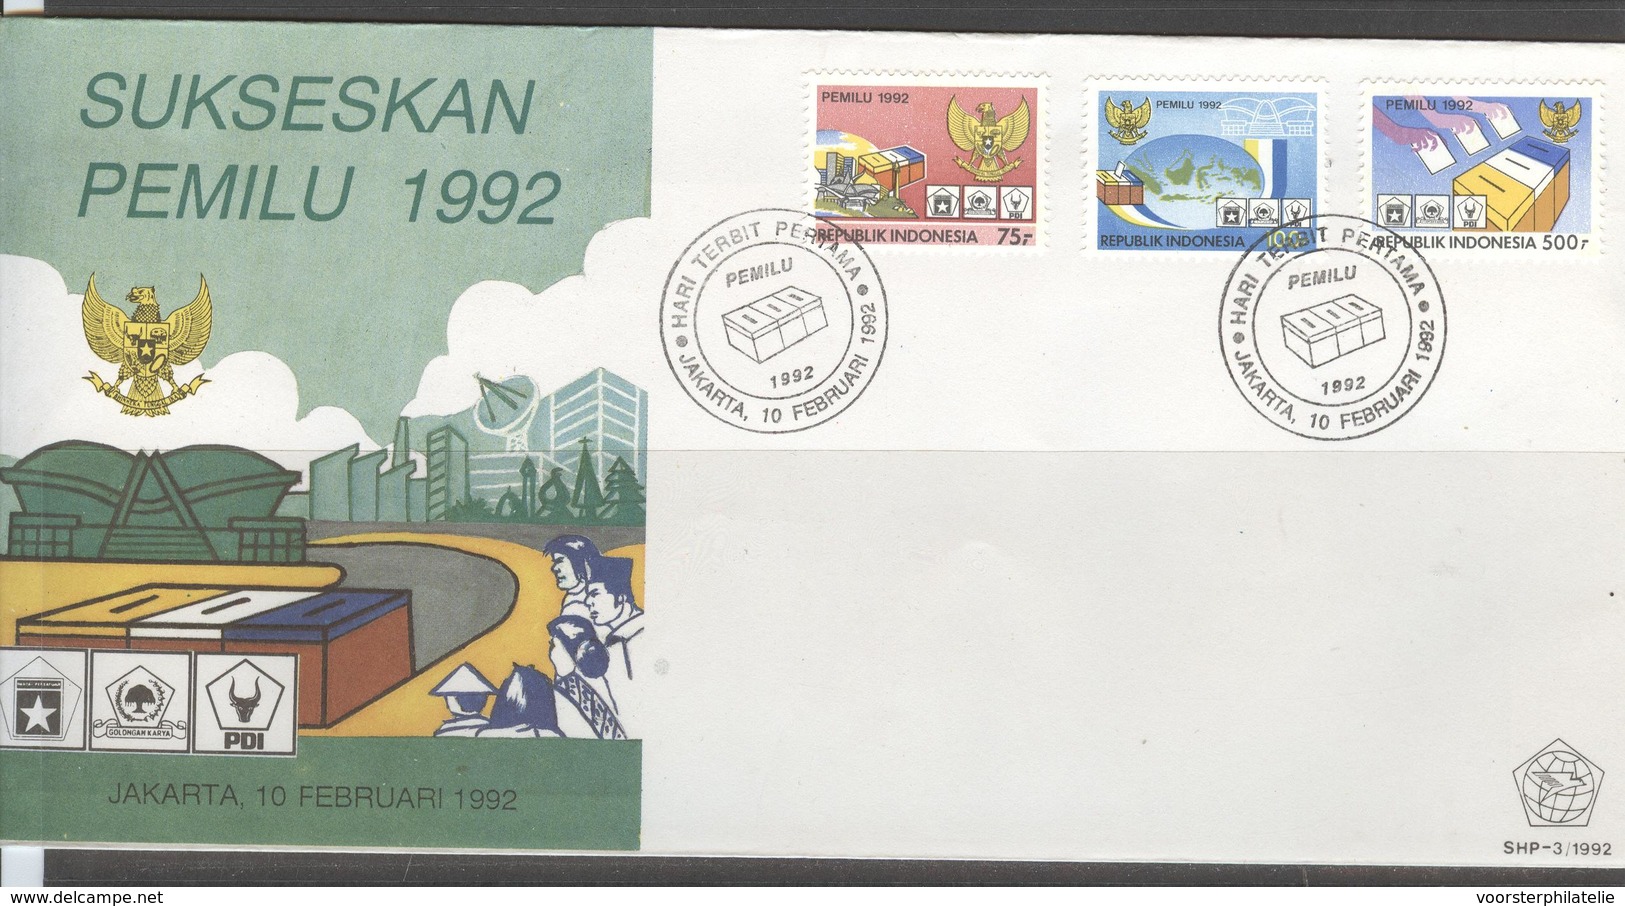 INDONESIË INDONESIA 1992 ZBL FDC SHP 03 BLANK BLANCO - Indonesia